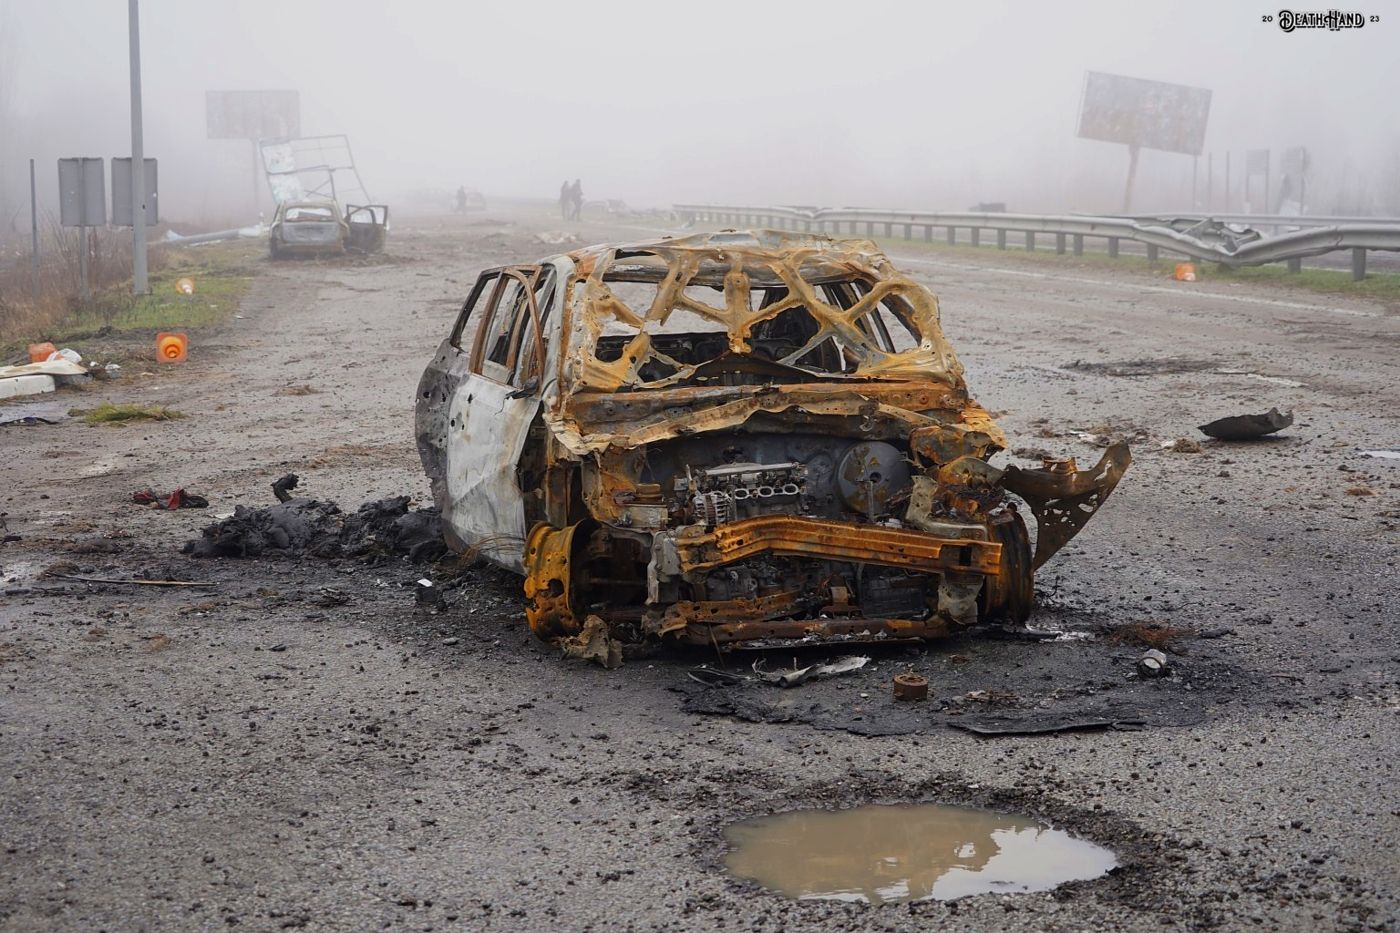 DH - M06 highway carnage beetween towns of Mriia and Myla - Ukraine 24 - early April 2022.jpg